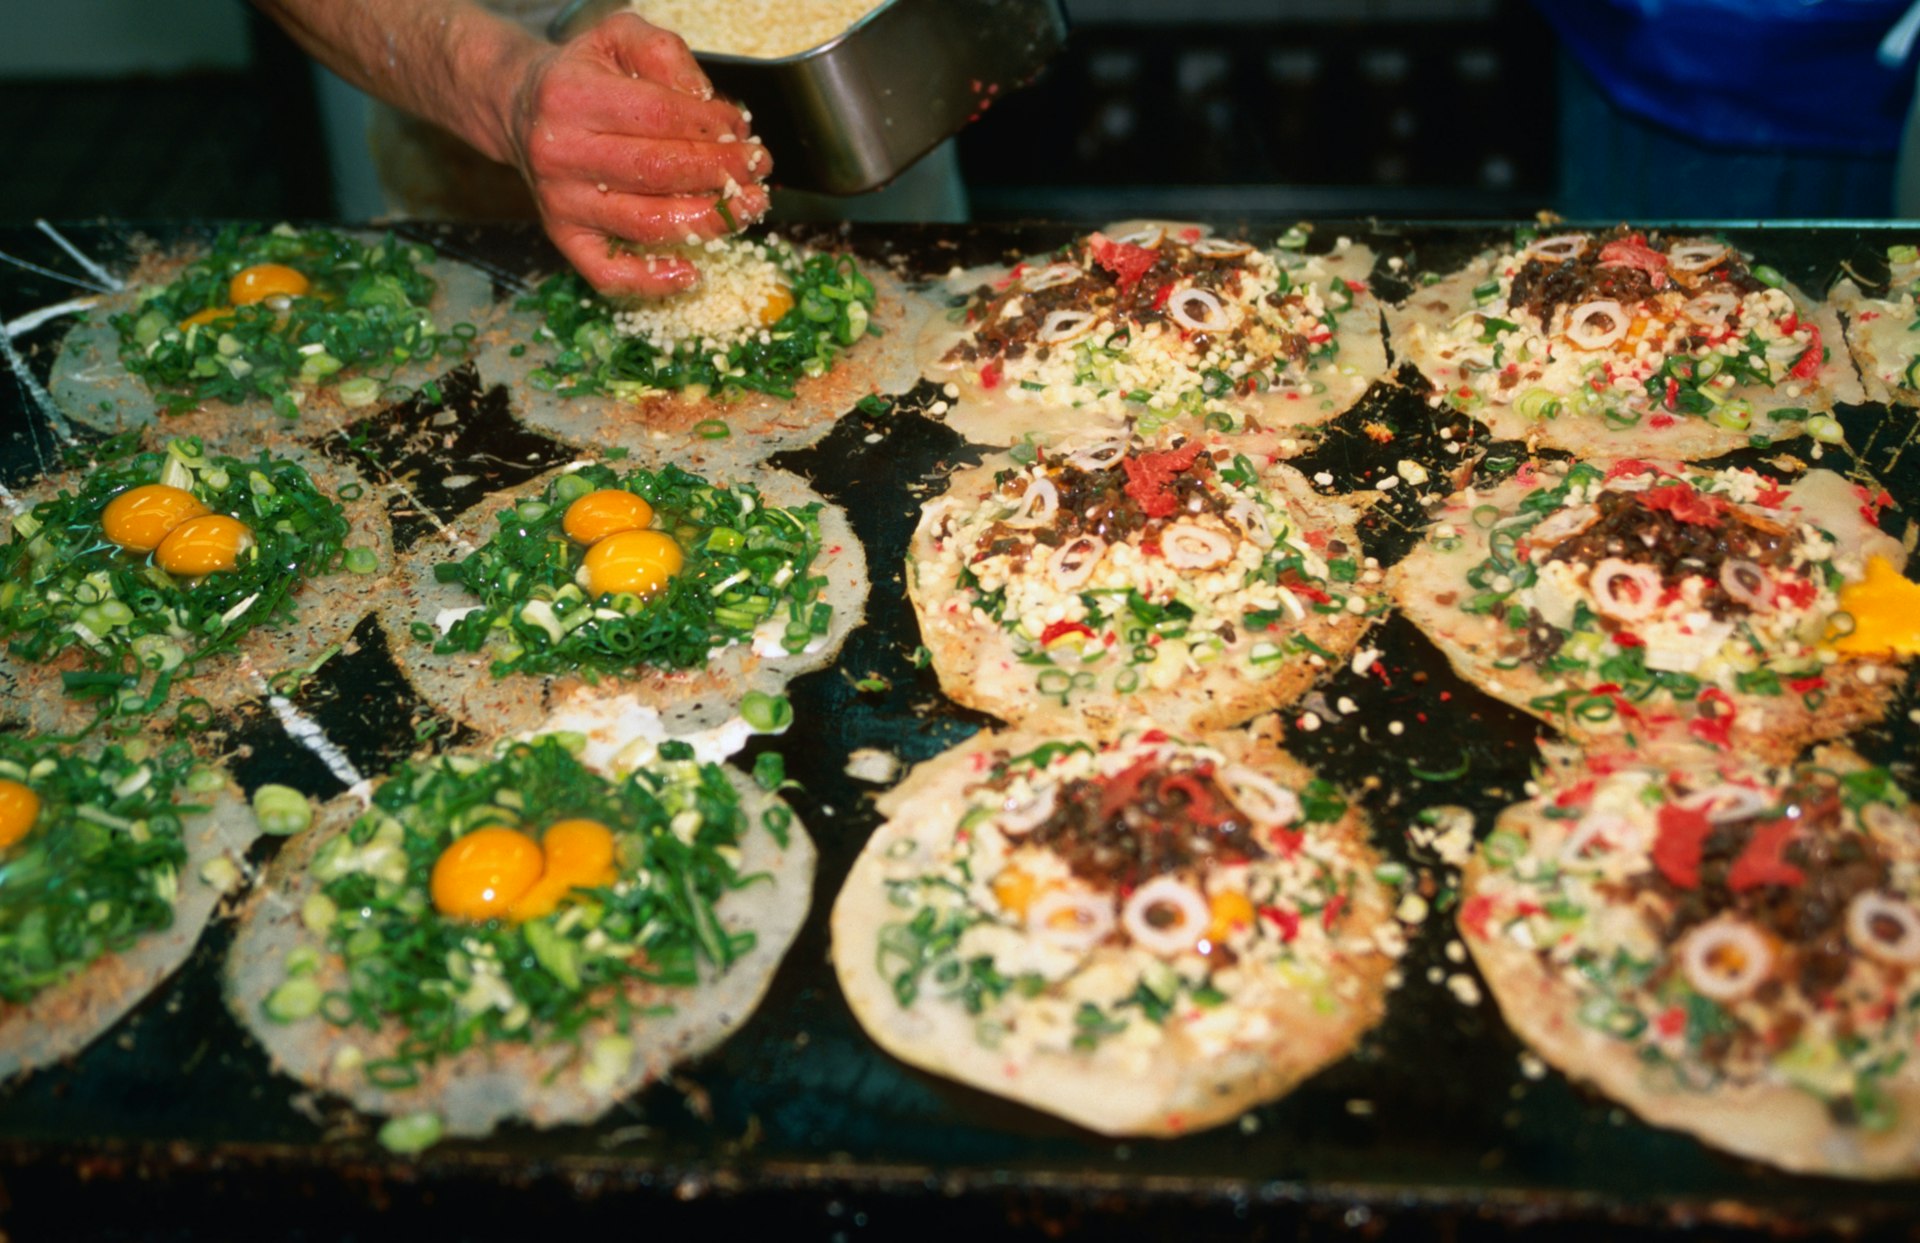 A chef preparing cabbage-based omelettes on a hot plate